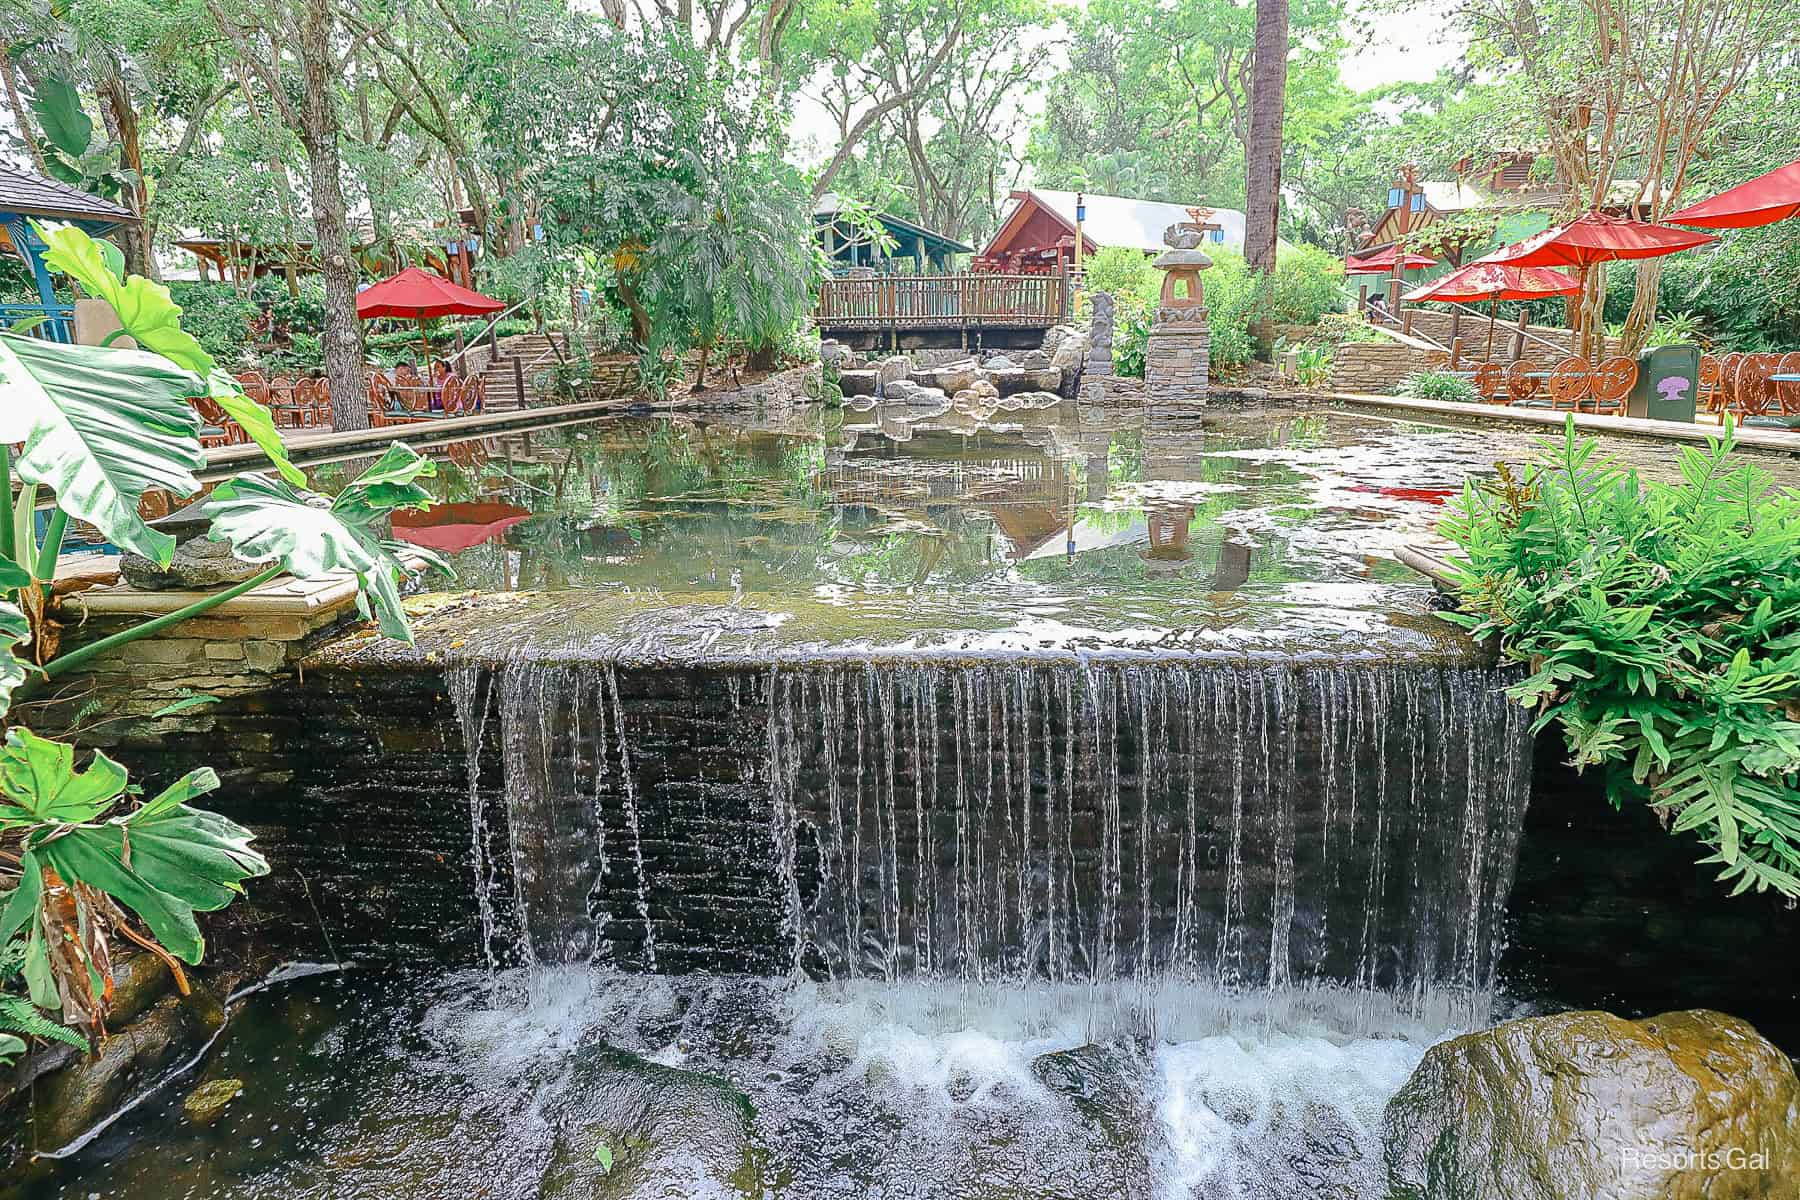 waterfalls at the Flame Tree Barbecue Dining area at Disney's Animal Kingdom 